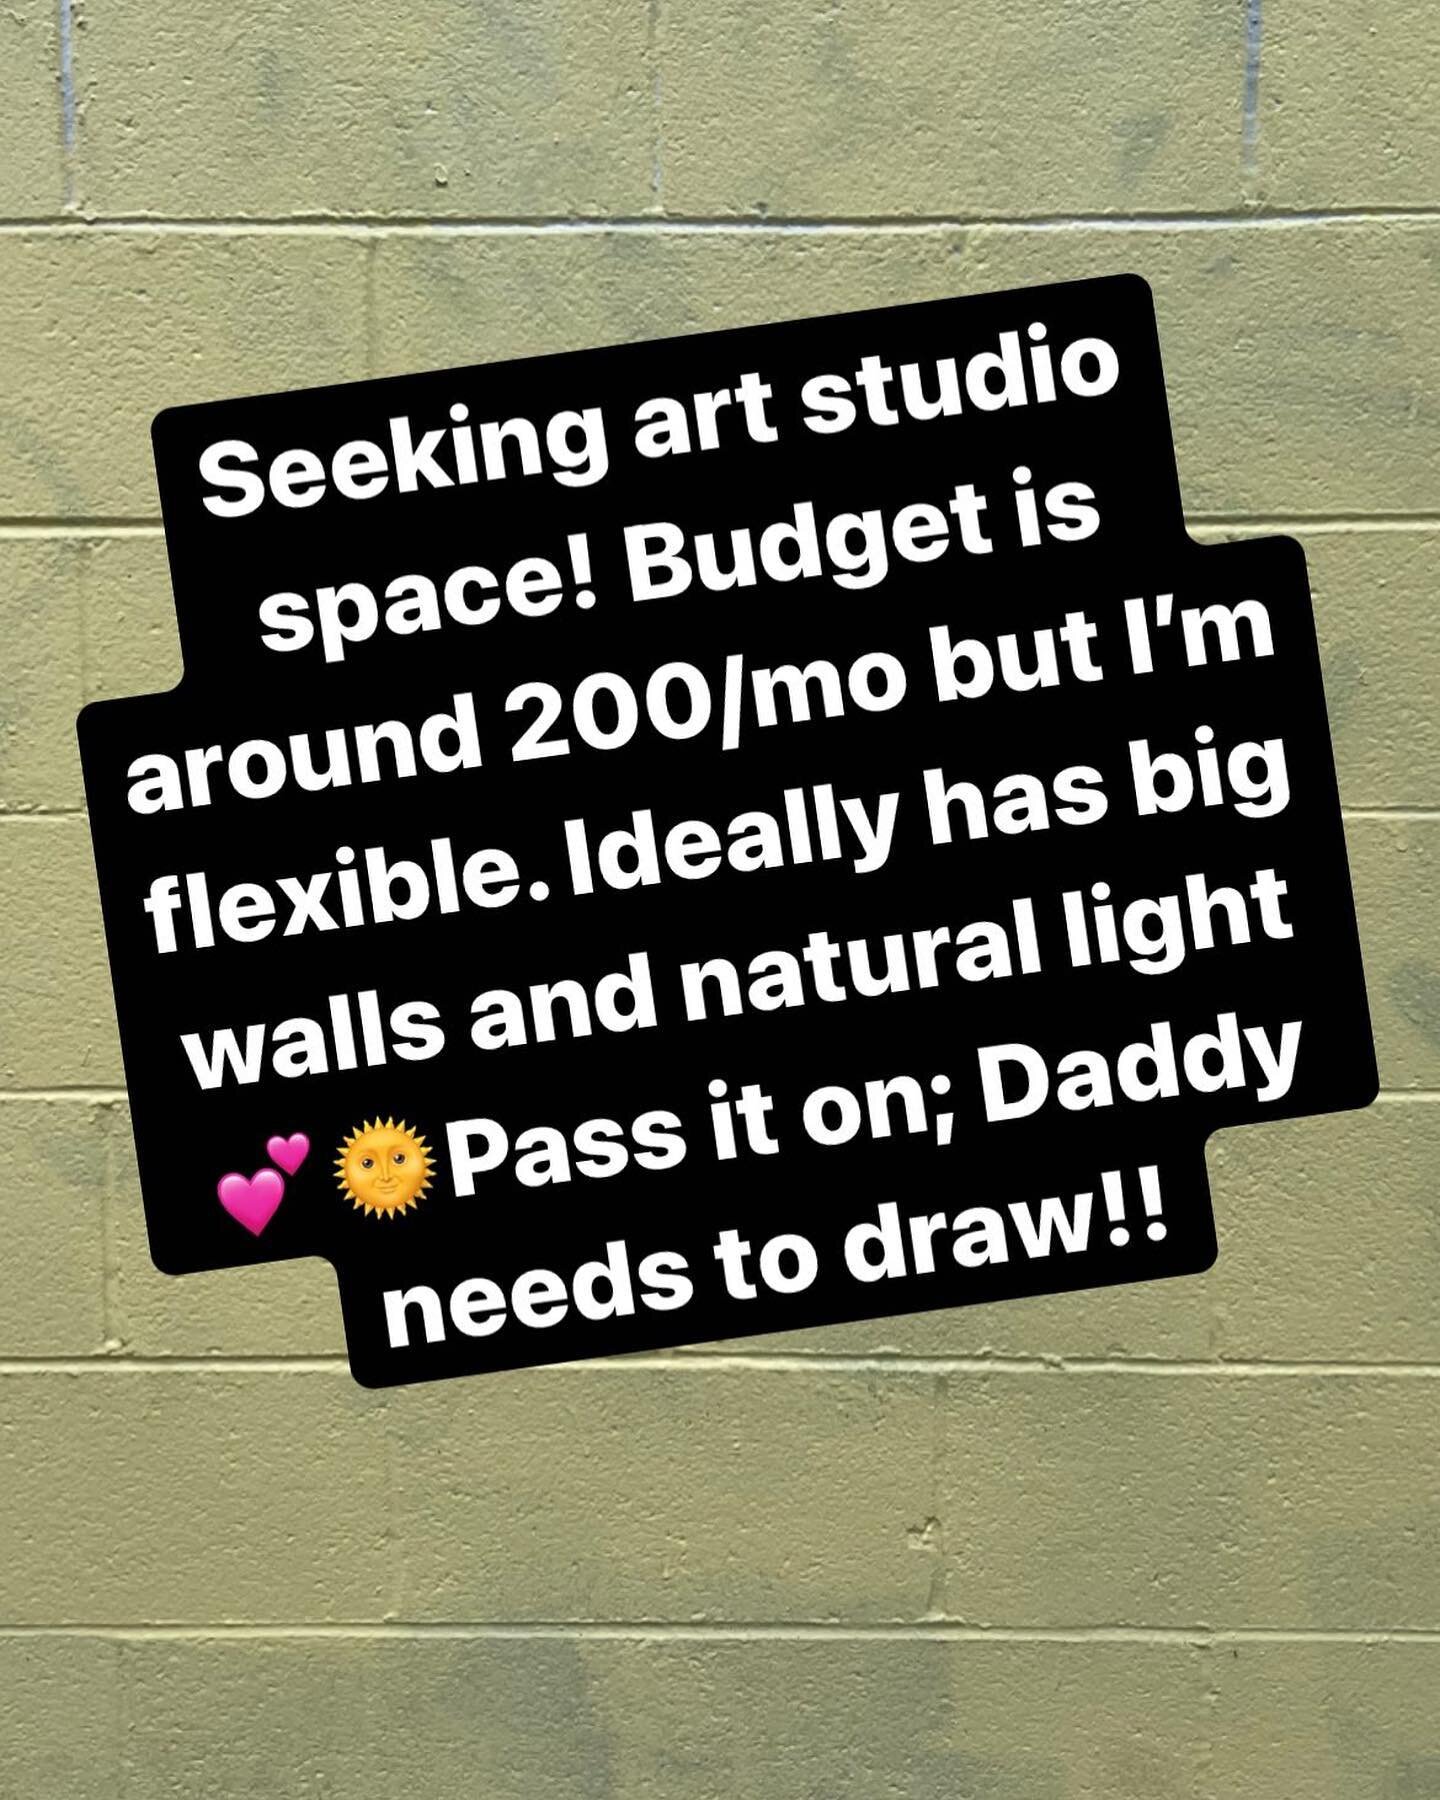 Portland: Keep an eye out for available studio spaces plz! I can finally afford to not work in my living room/bedroom so this will be a huge game changer for me!😊